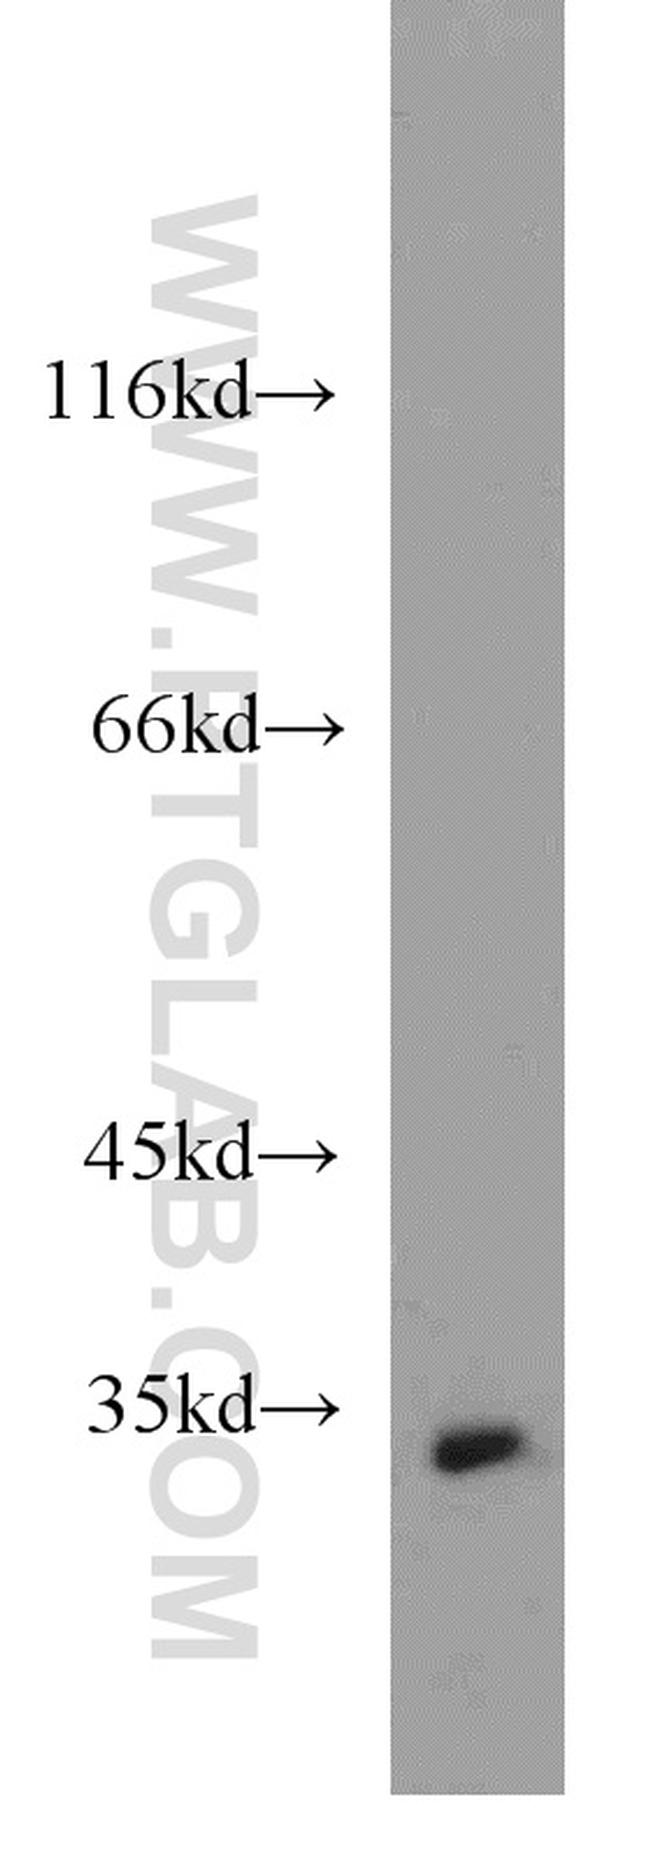 RGN/SMP30 Antibody in Western Blot (WB)